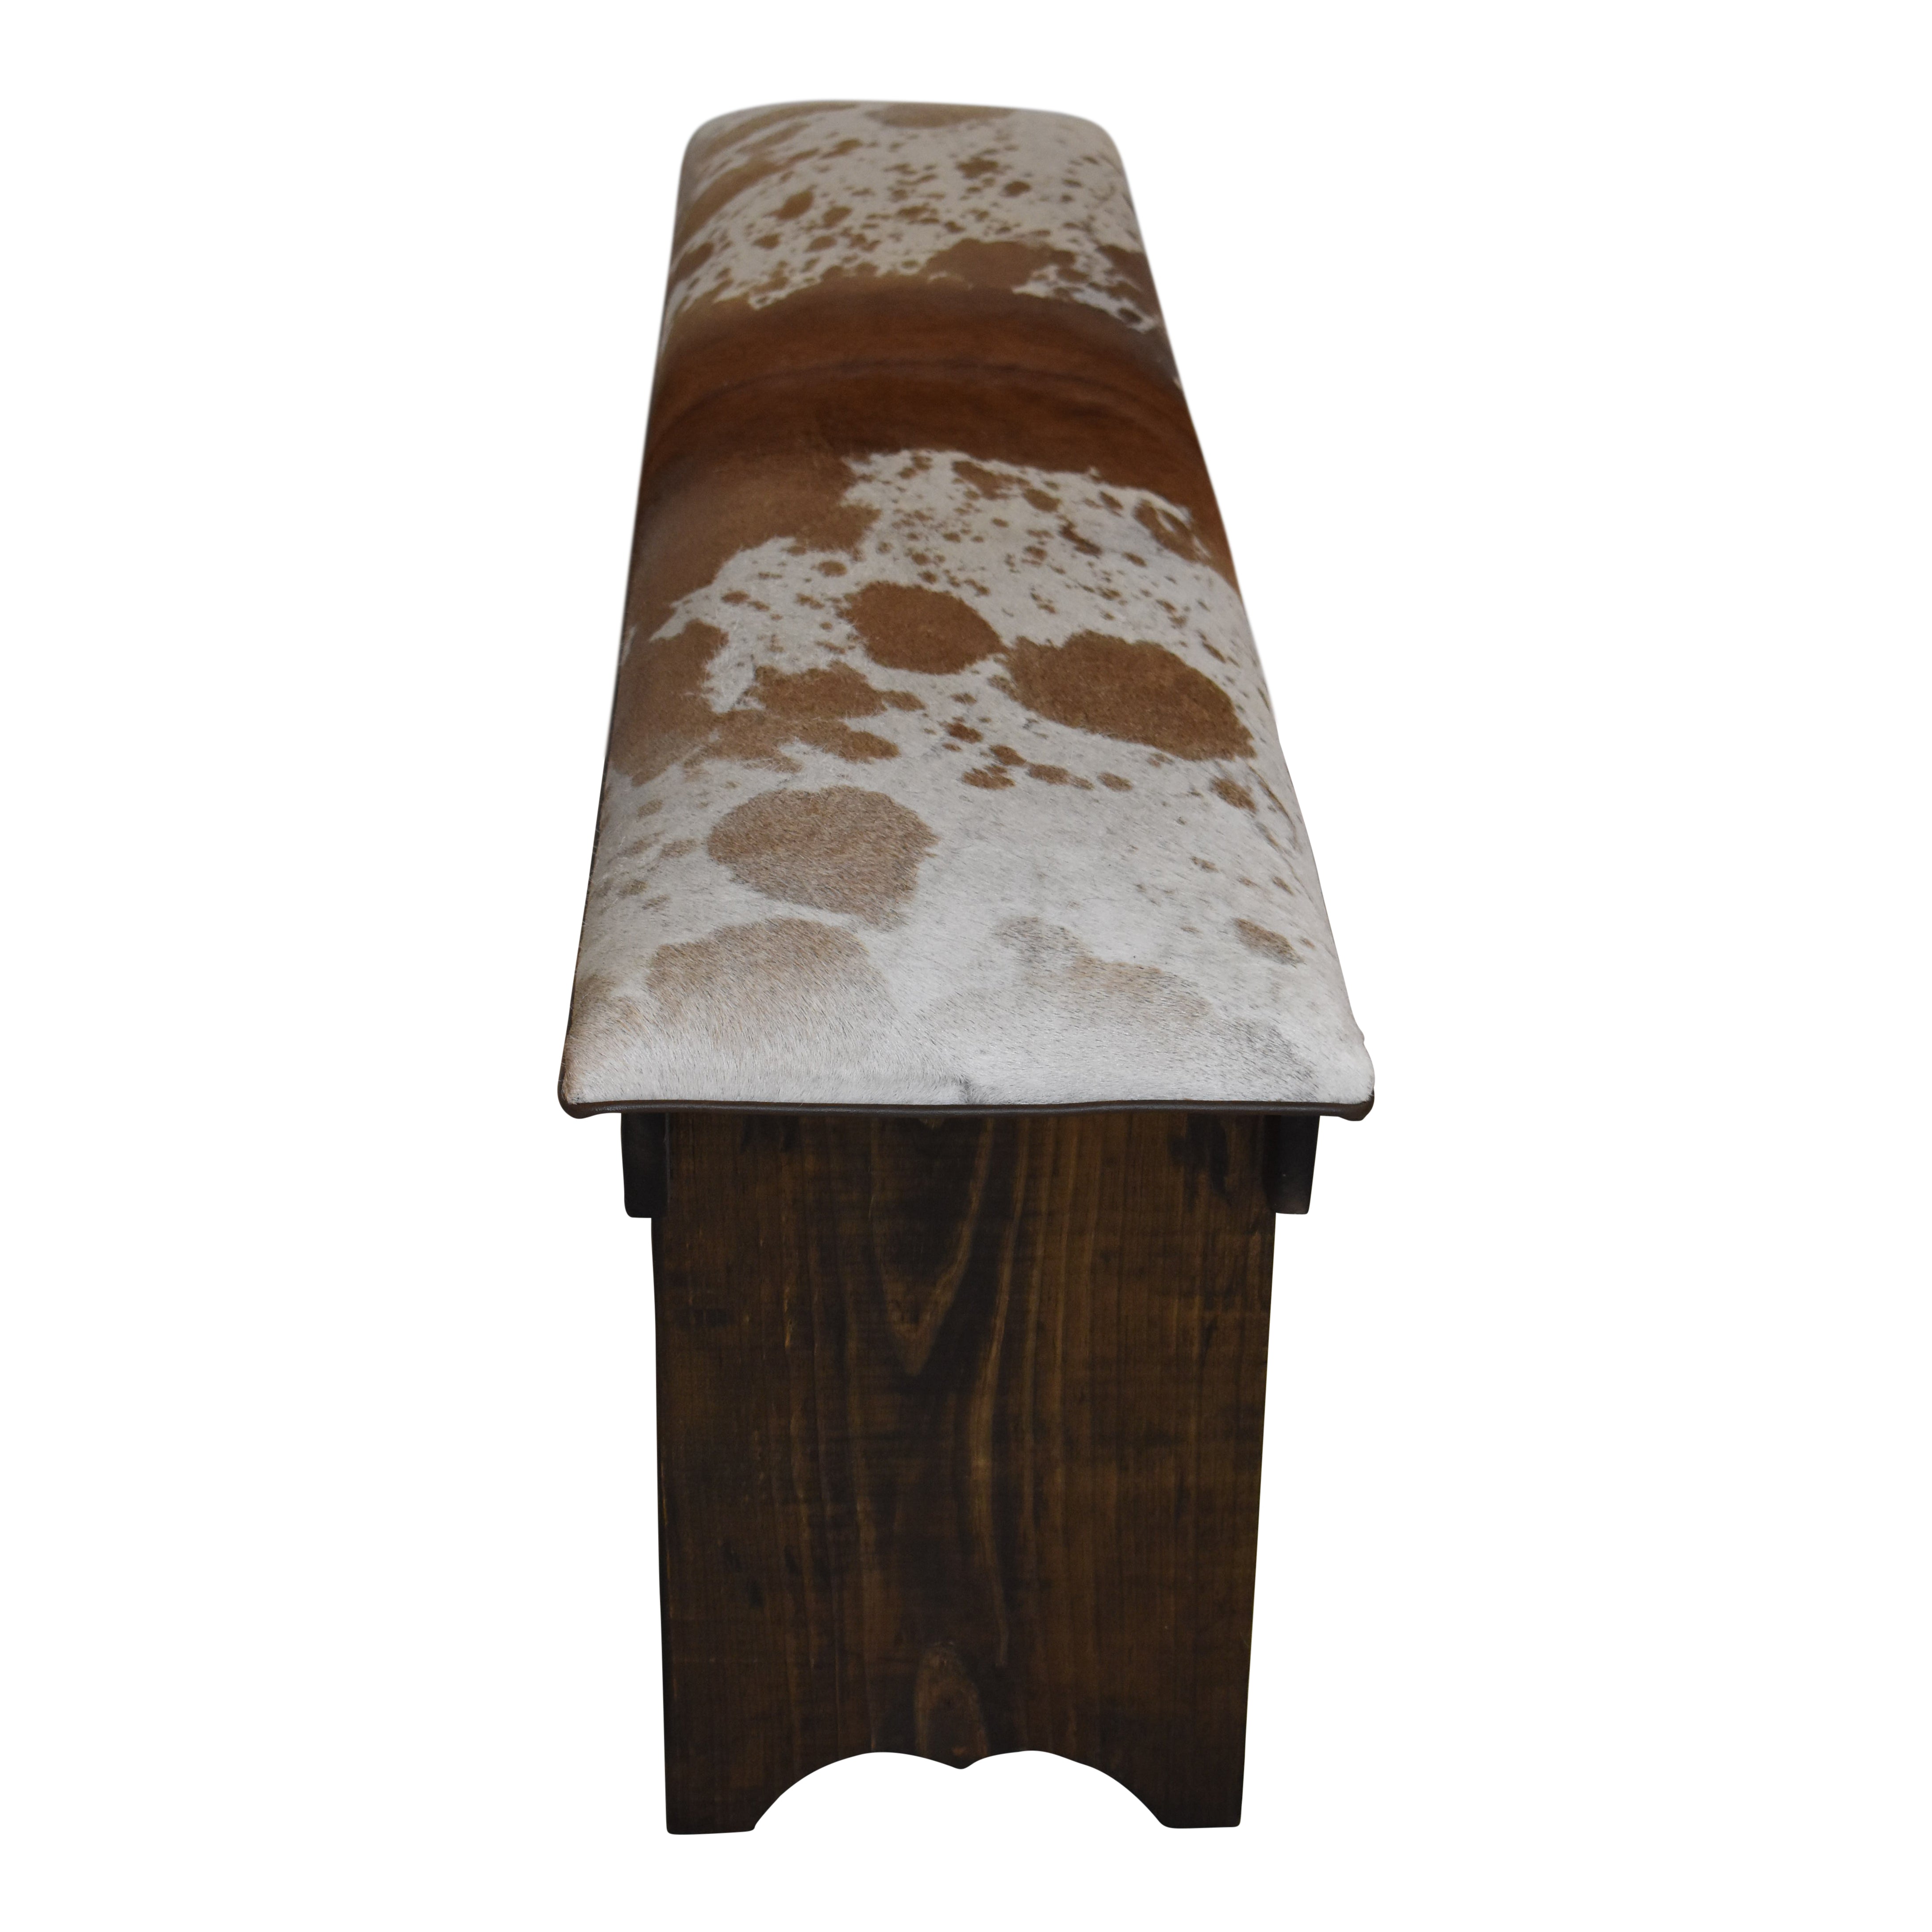 Cowhide Bench with Shelf